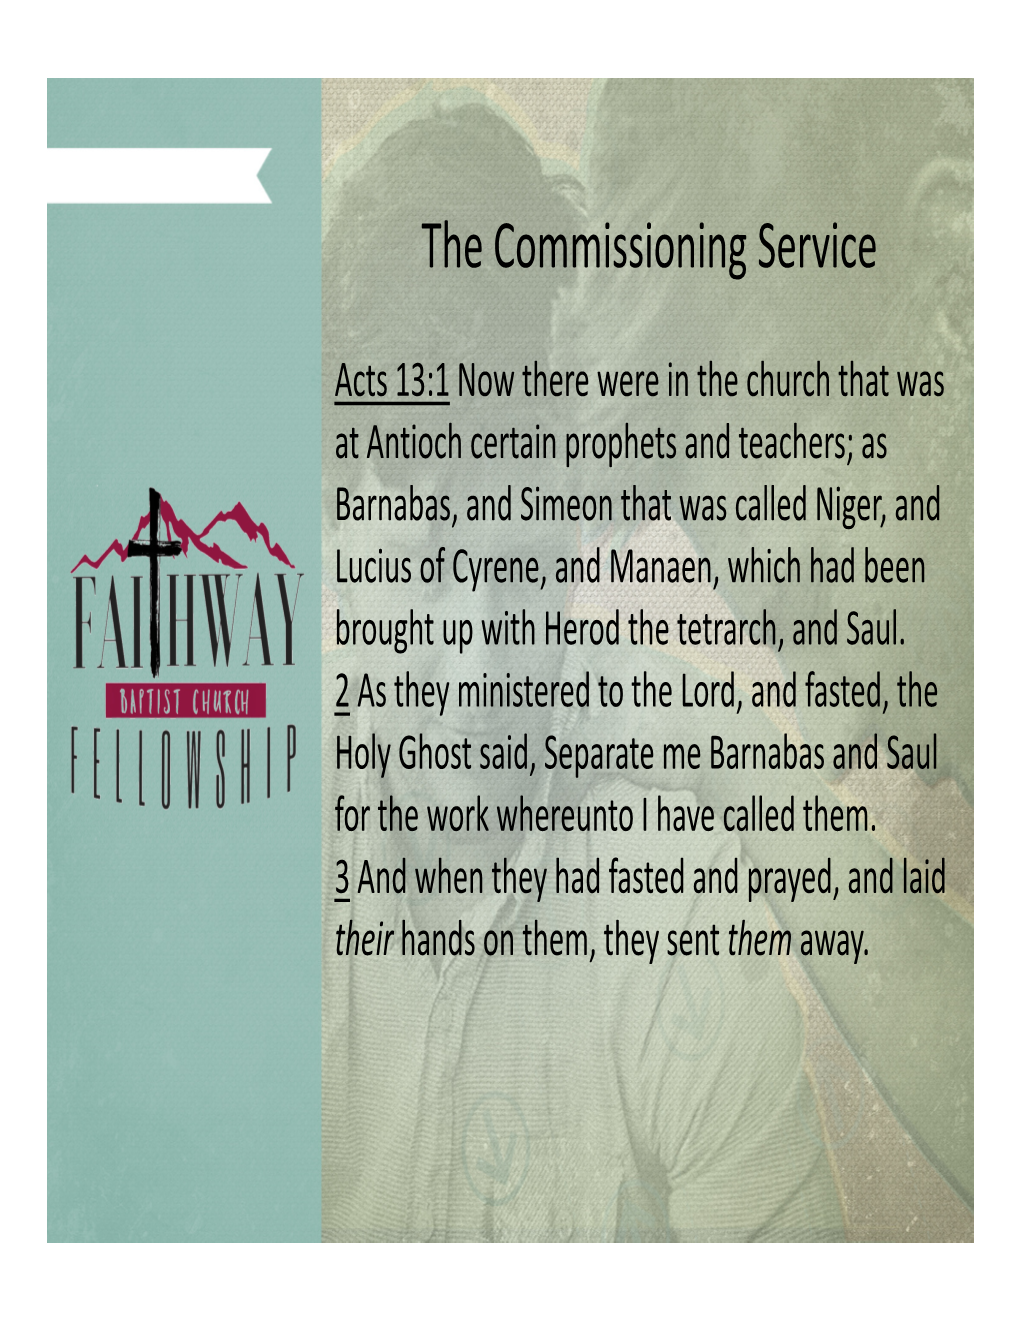 The Commissioning Service